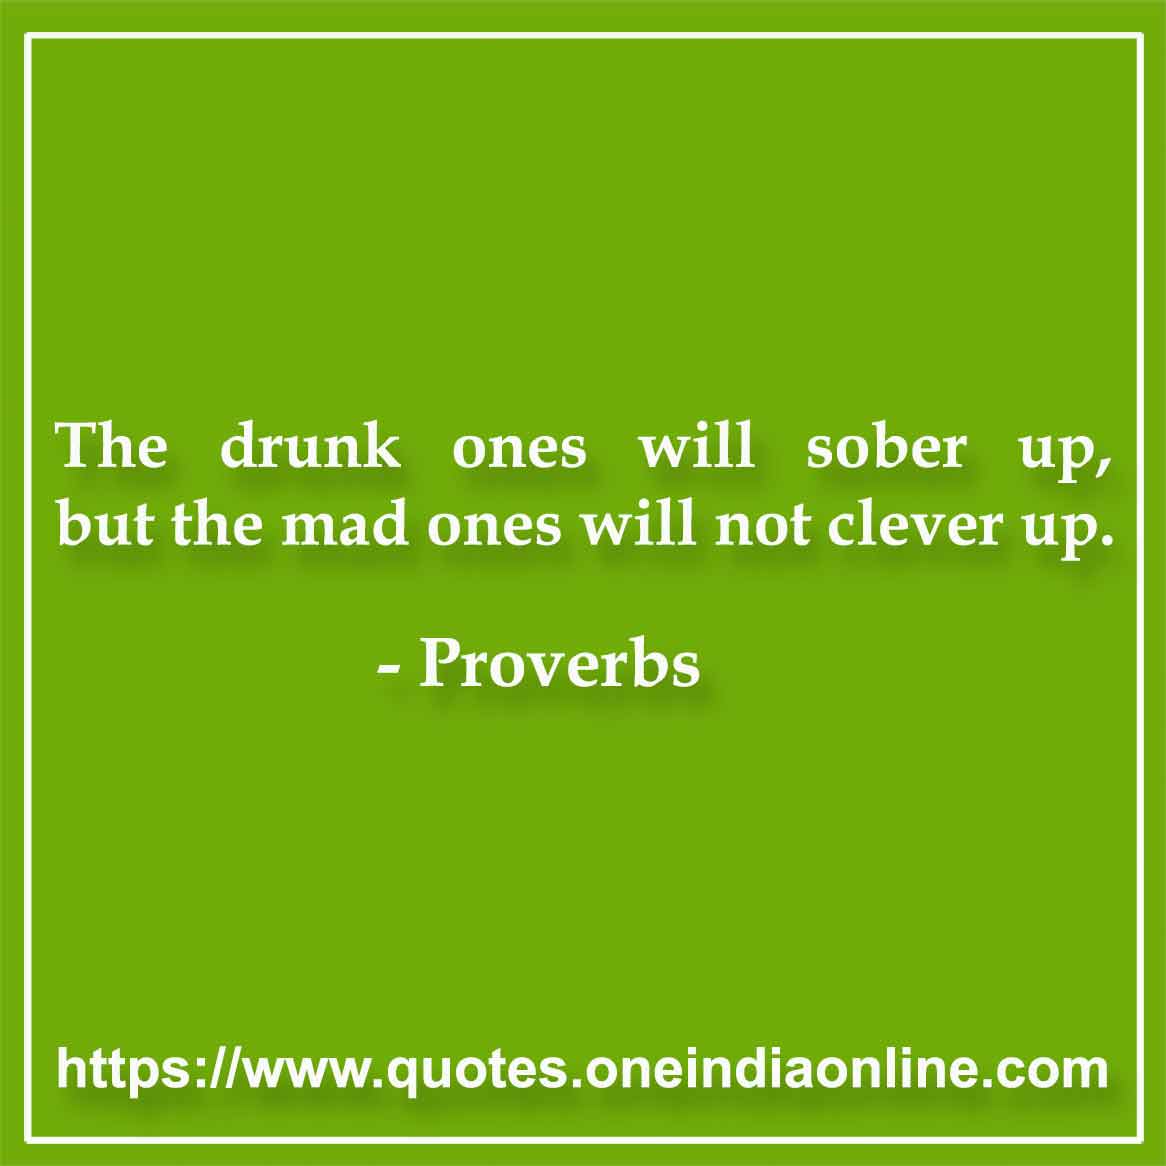 The drunk ones will sober up, but the mad ones will not clever up.

Bengali 